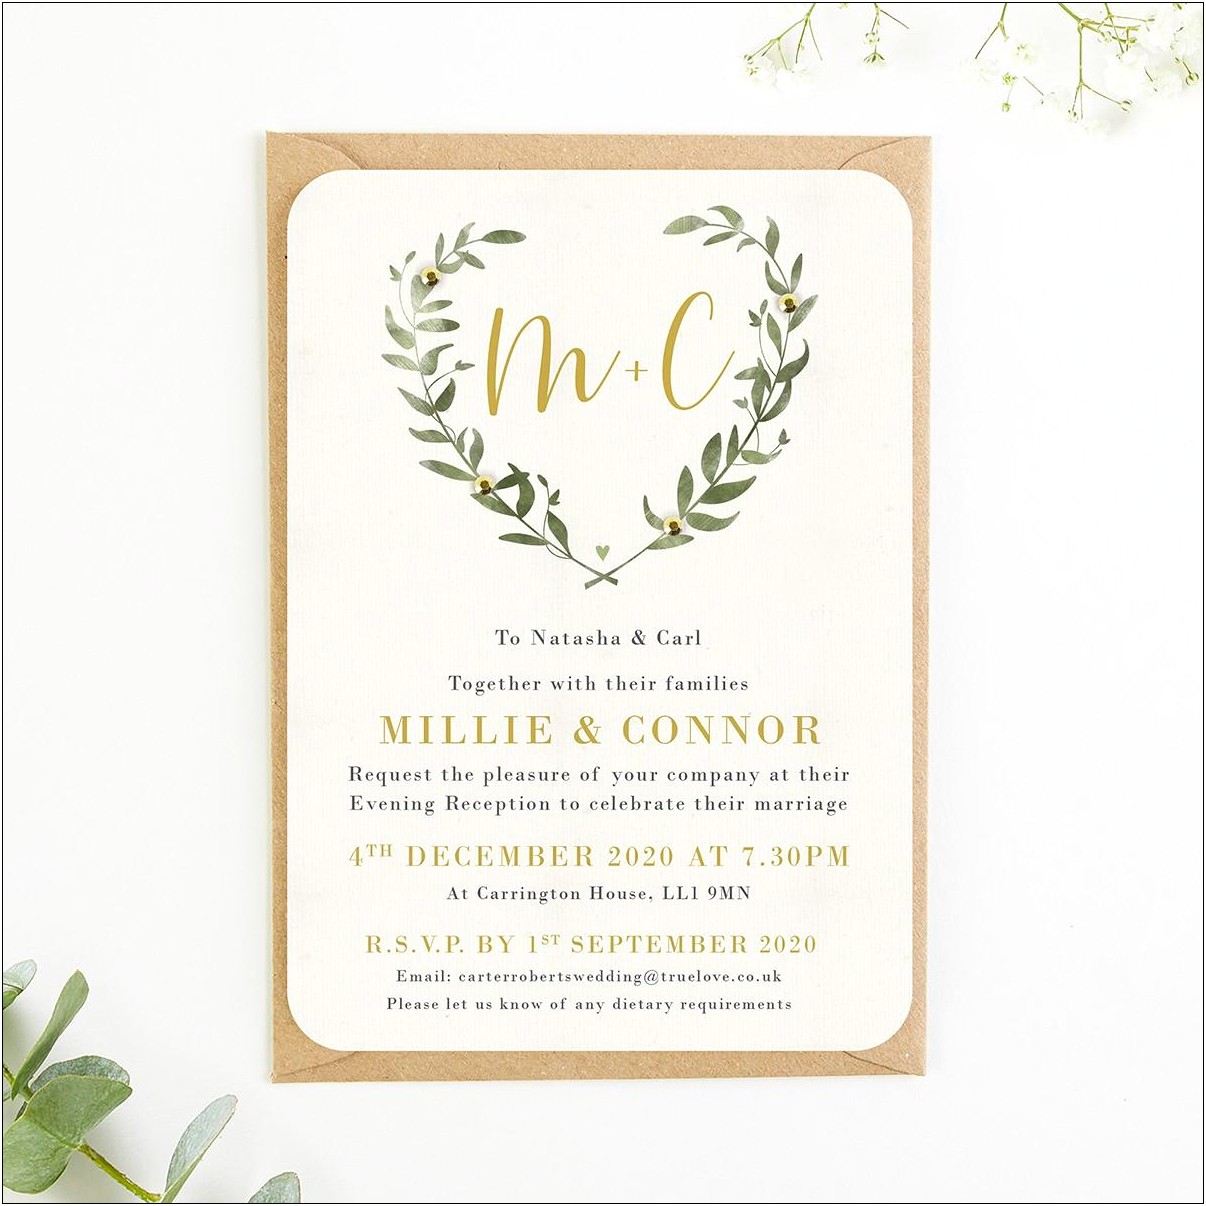 Does The Wedding Party Get Invitations